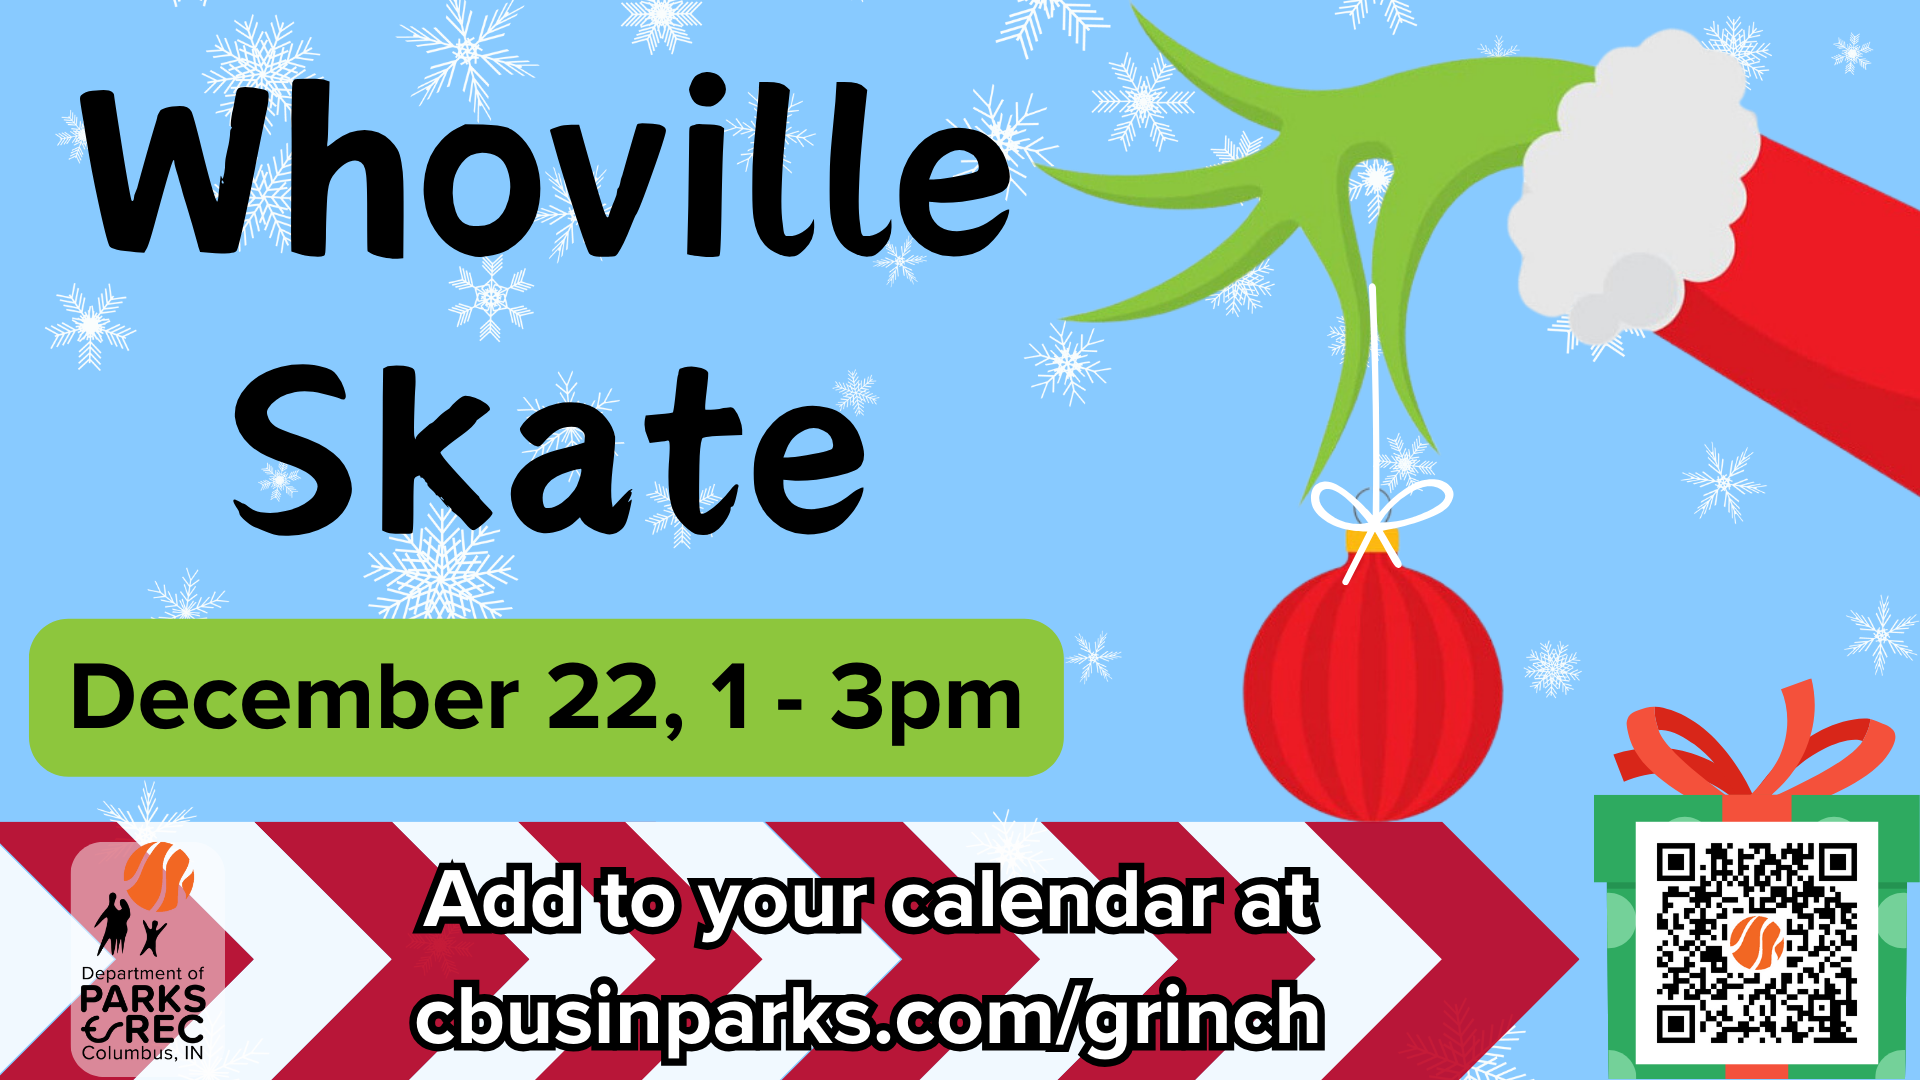 Whoville Skate: December 24, 1-3pm/ Add to your calendar at cbusinparks.com/grinch